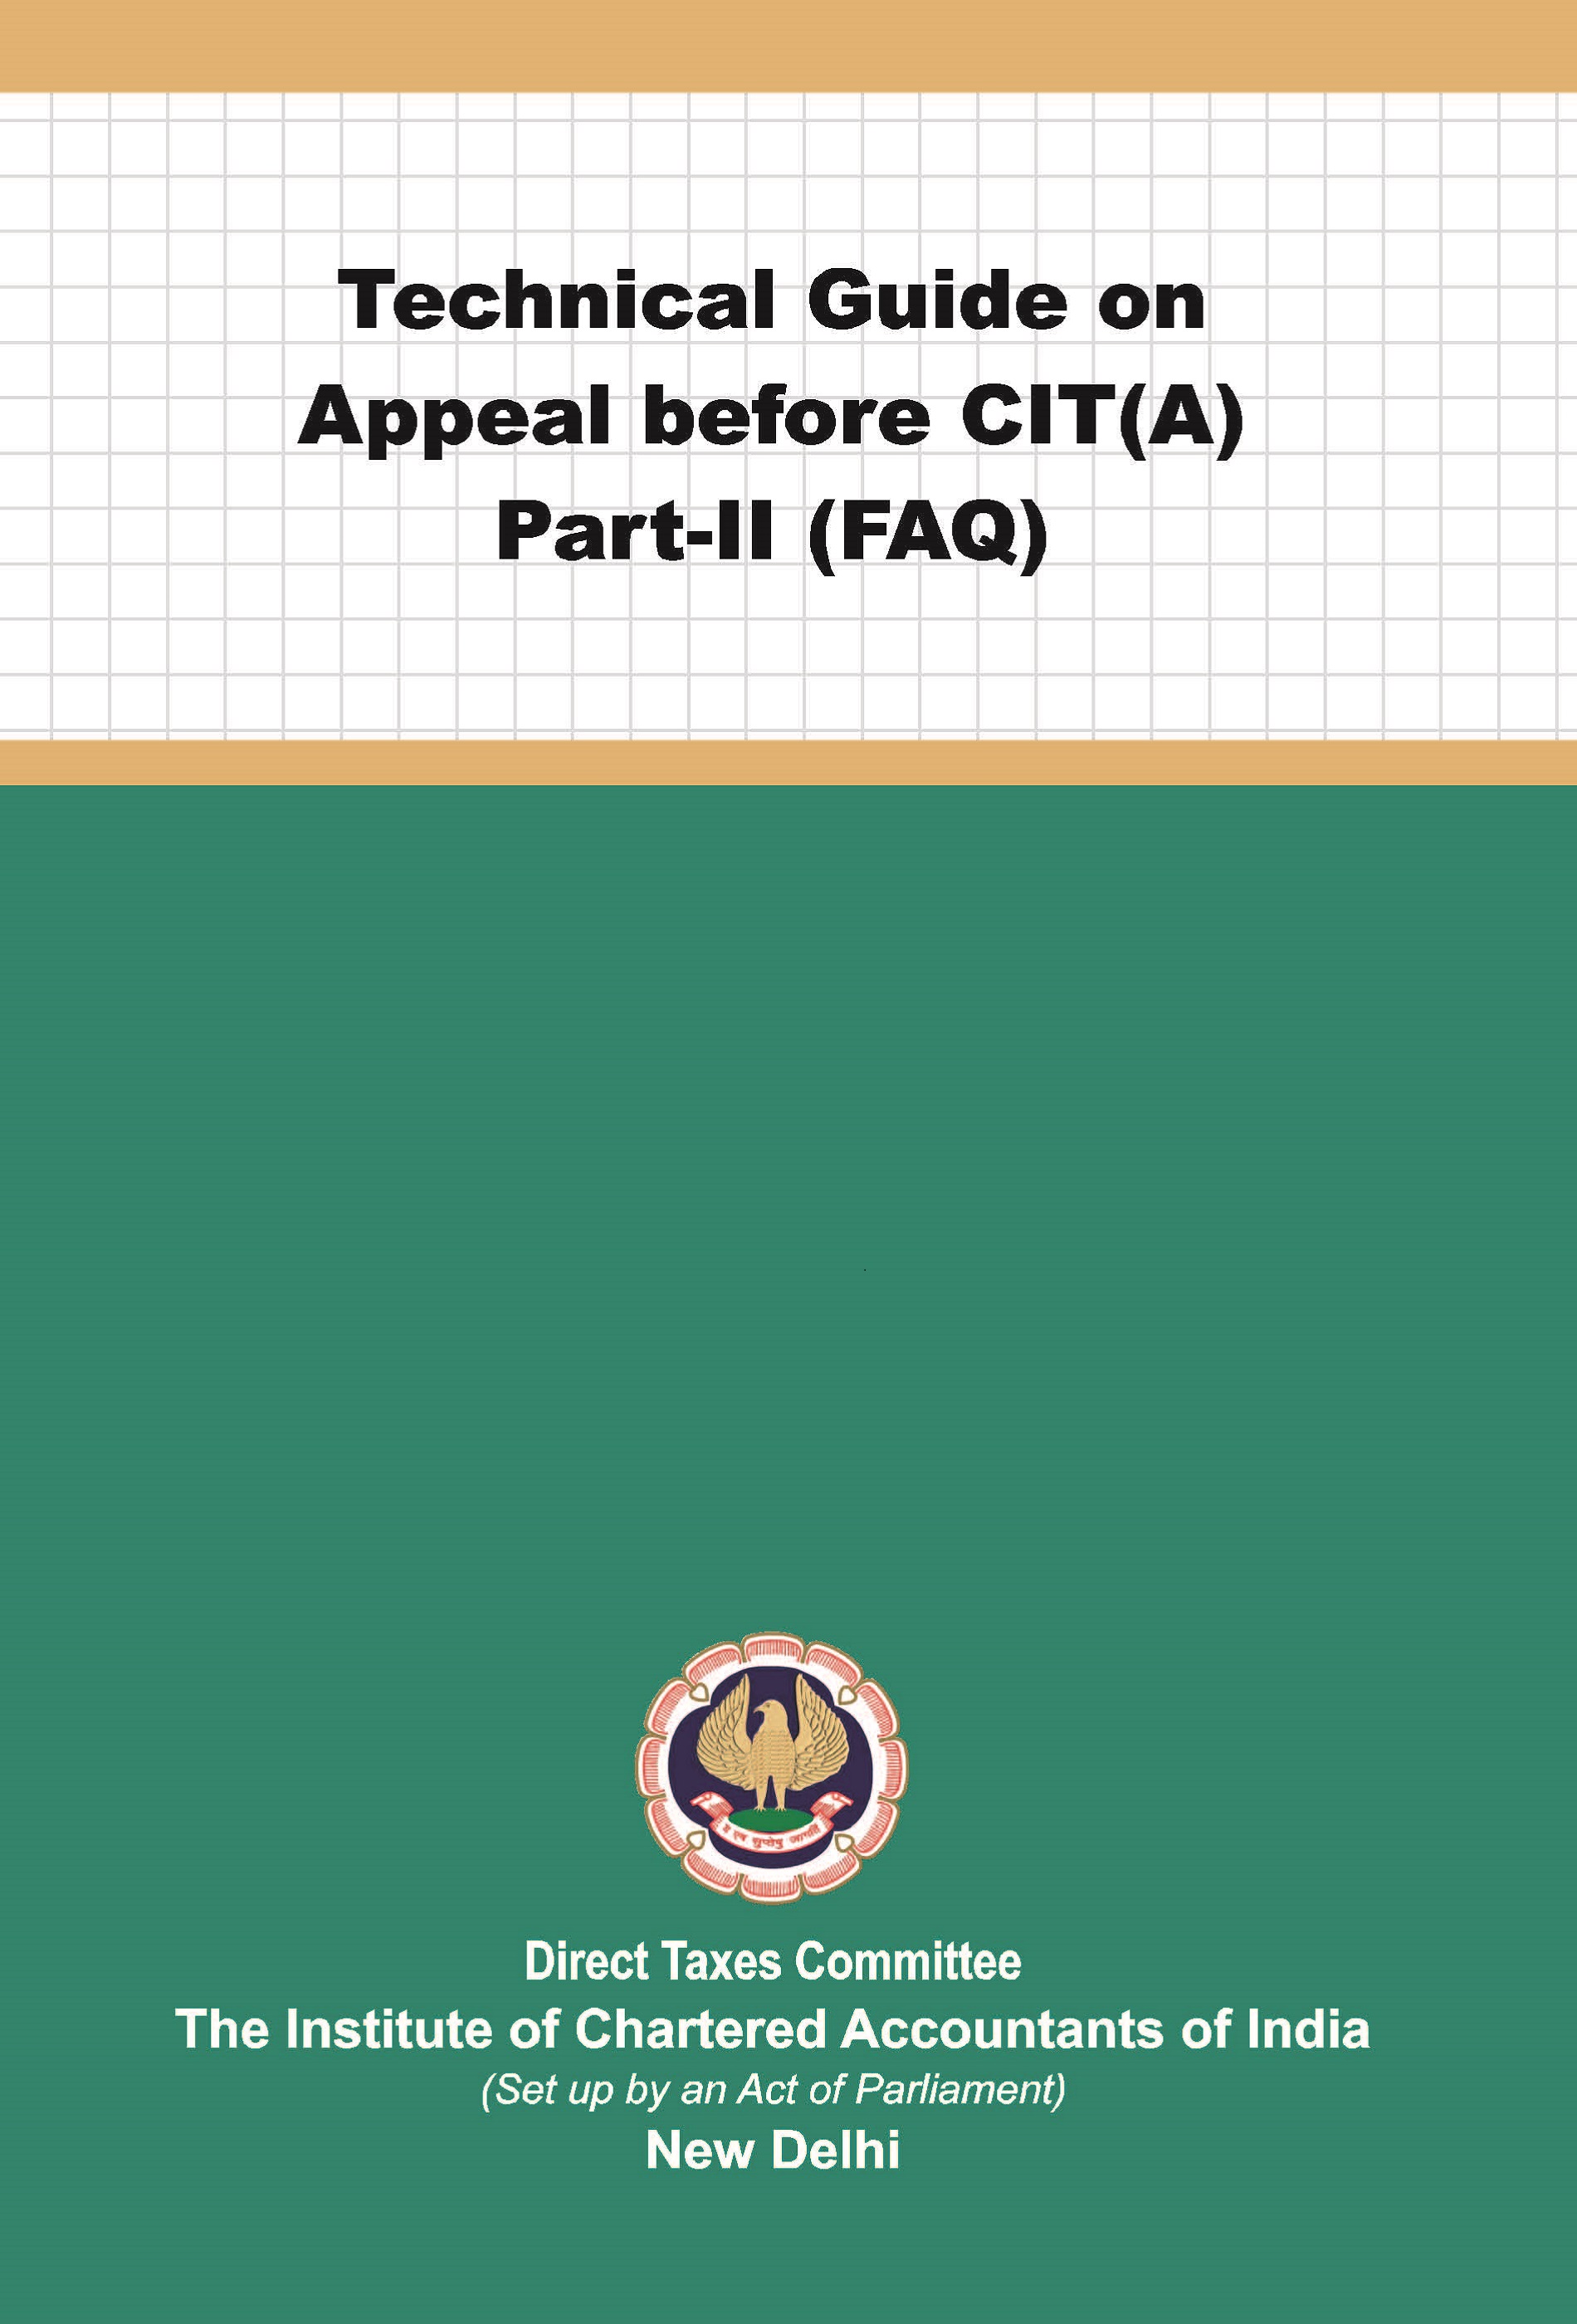 Technical Guide on Appeal before CIT (A) Part-II (FAQ) (August, 2021)